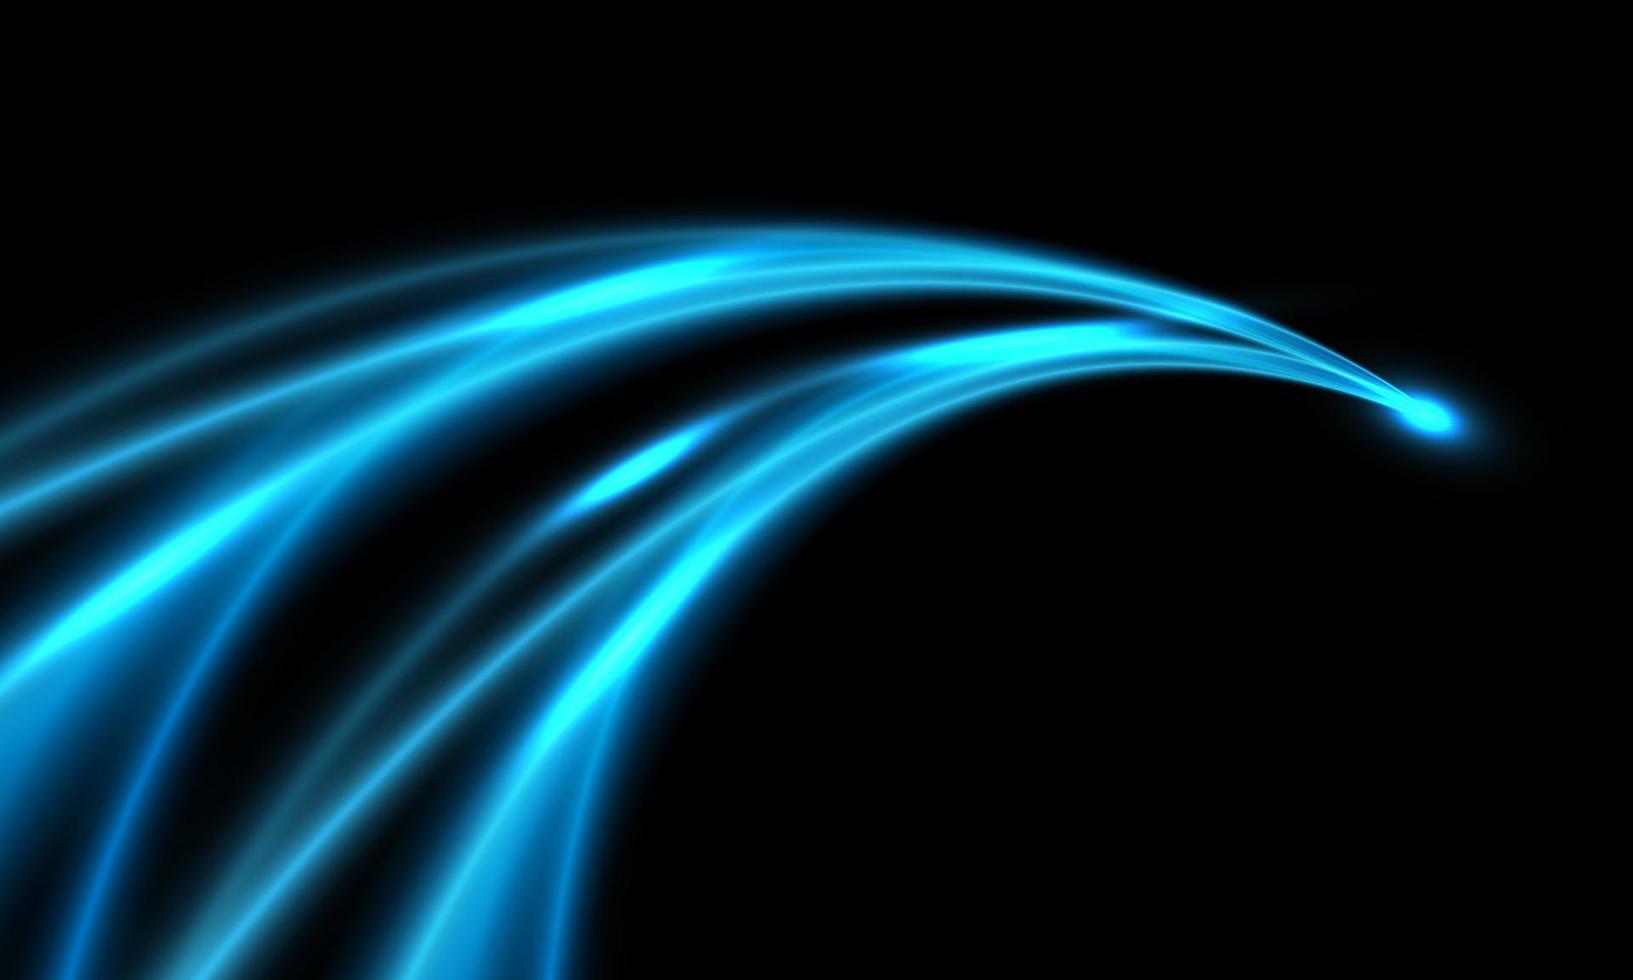 Abstract blue light curve speed on black design modern futuristic technology background vector